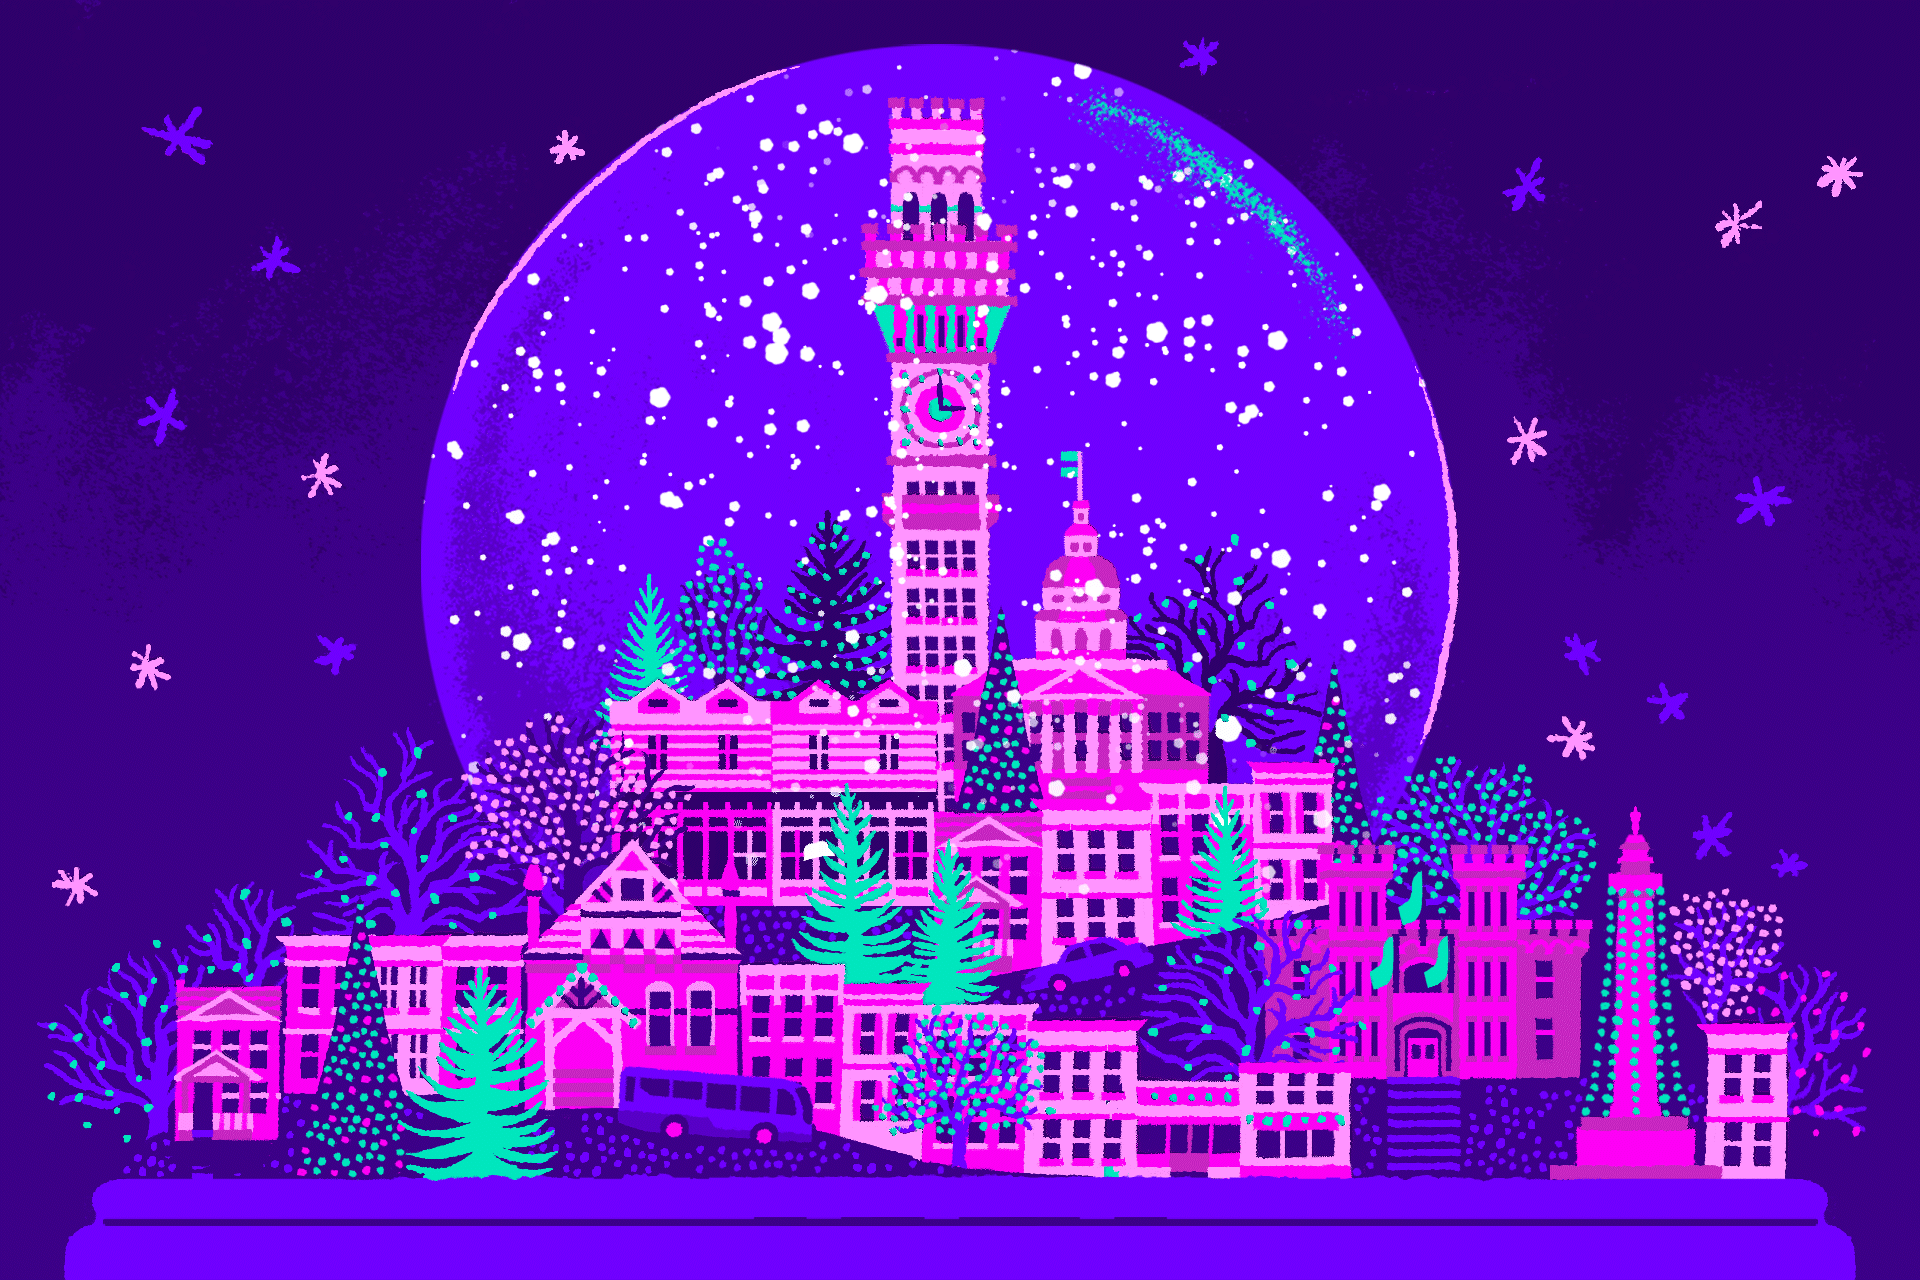 The Baltimore Banner gift guide illustration. A hand-drawn illustration of a city in a snow globe with falling snow.